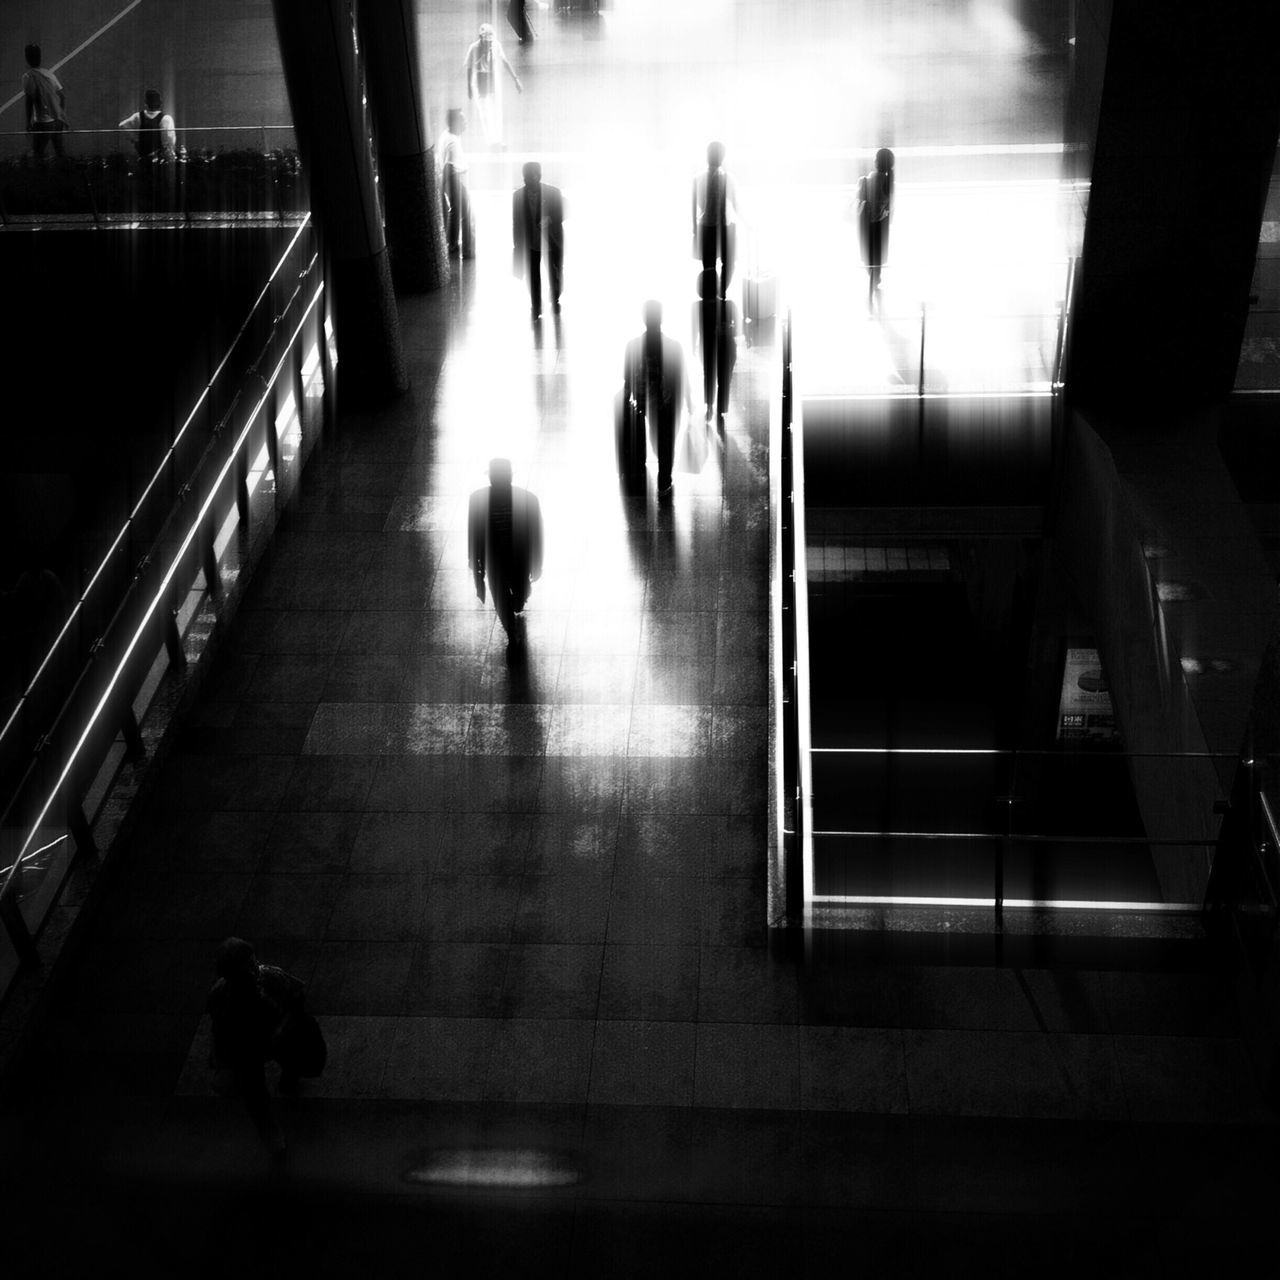 indoors, men, lifestyles, person, large group of people, illuminated, silhouette, medium group of people, leisure activity, walking, night, city life, transportation, group of people, travel, on the move, glass - material, reflection, passenger